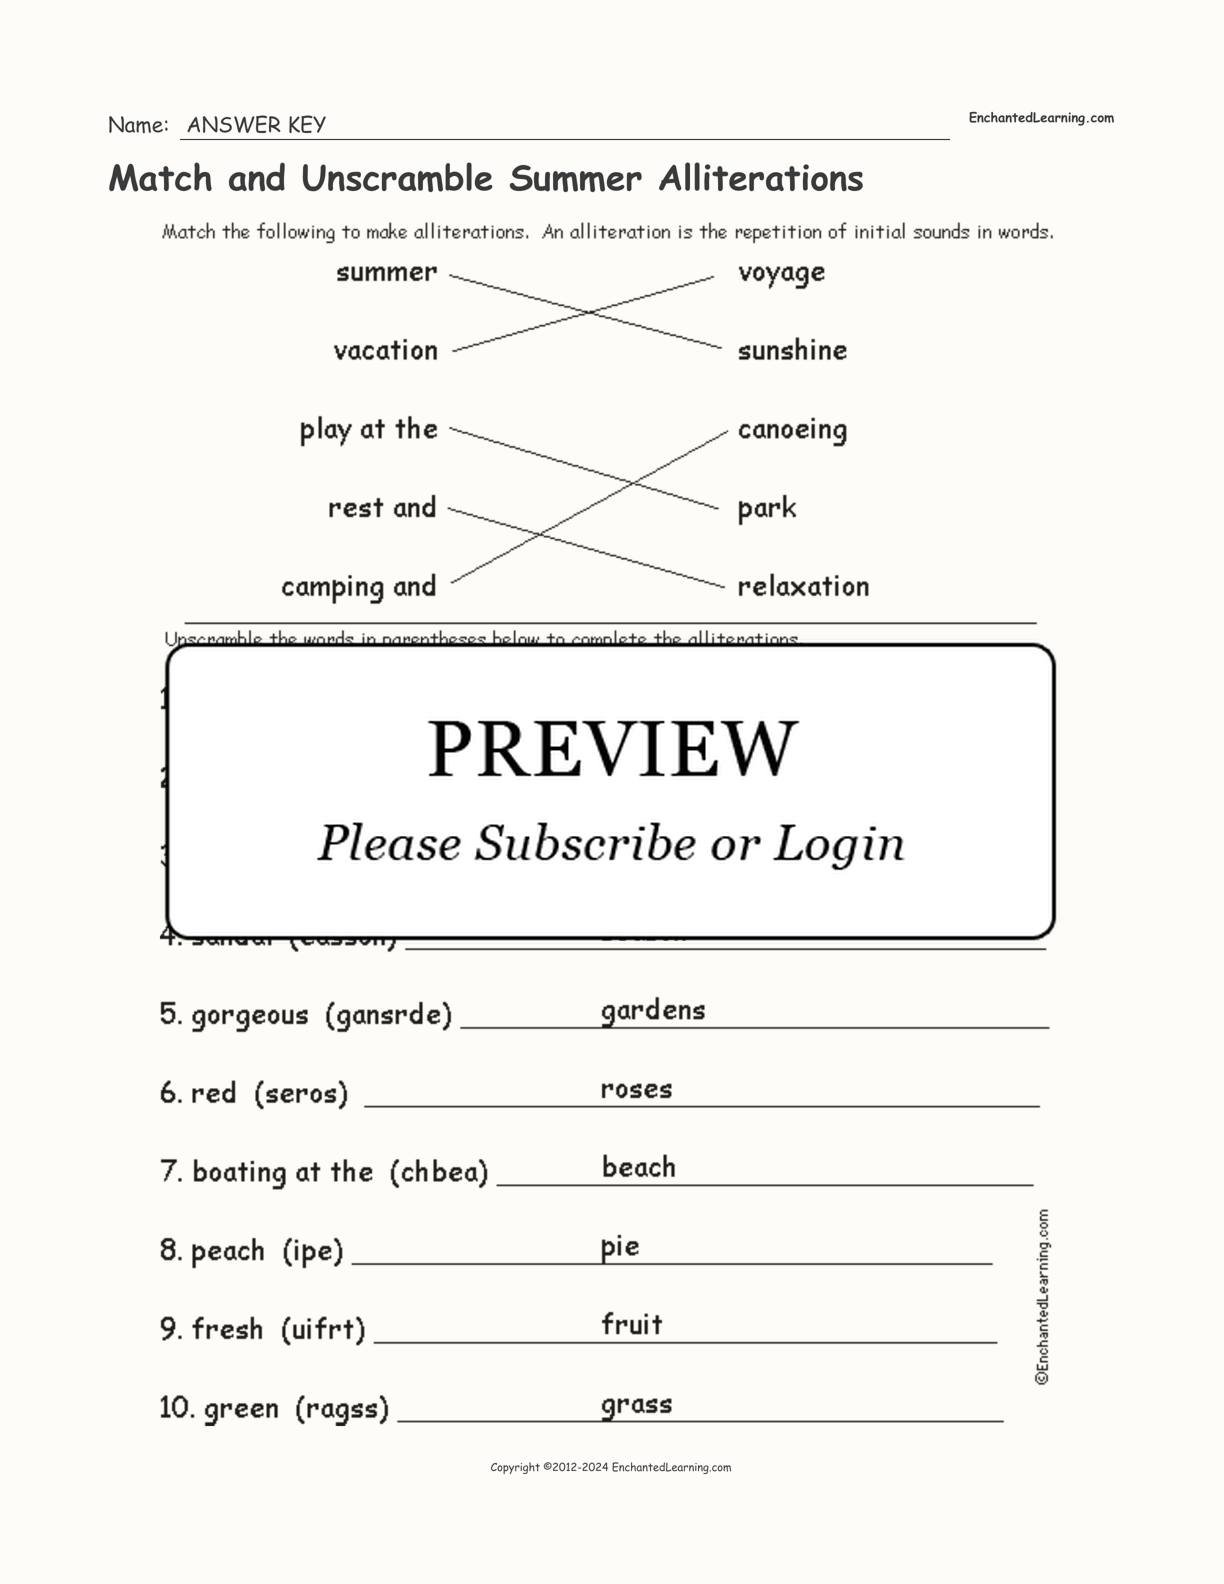 Match and Unscramble Summer Alliterations interactive worksheet page 2